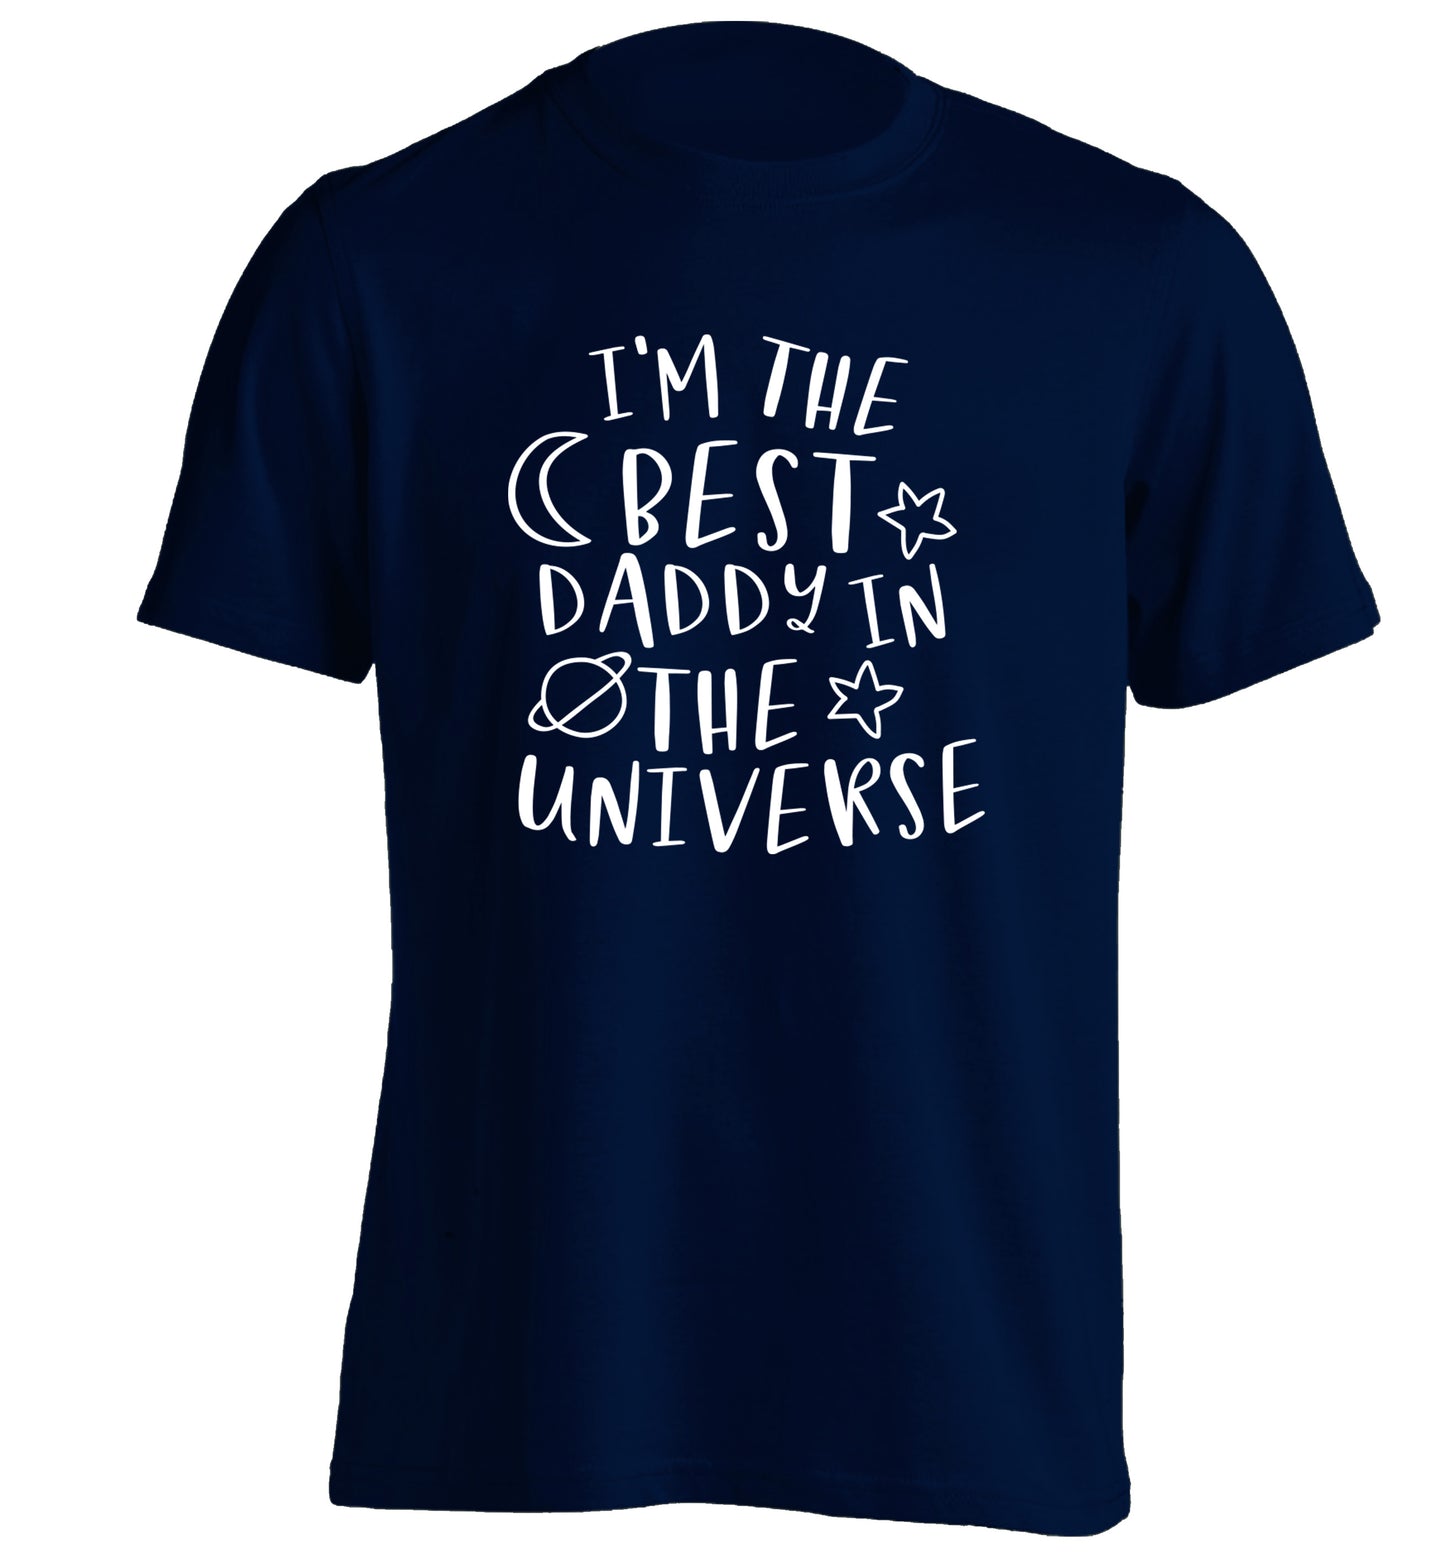 I'm the best daddy in the universe adults unisex navy Tshirt 2XL